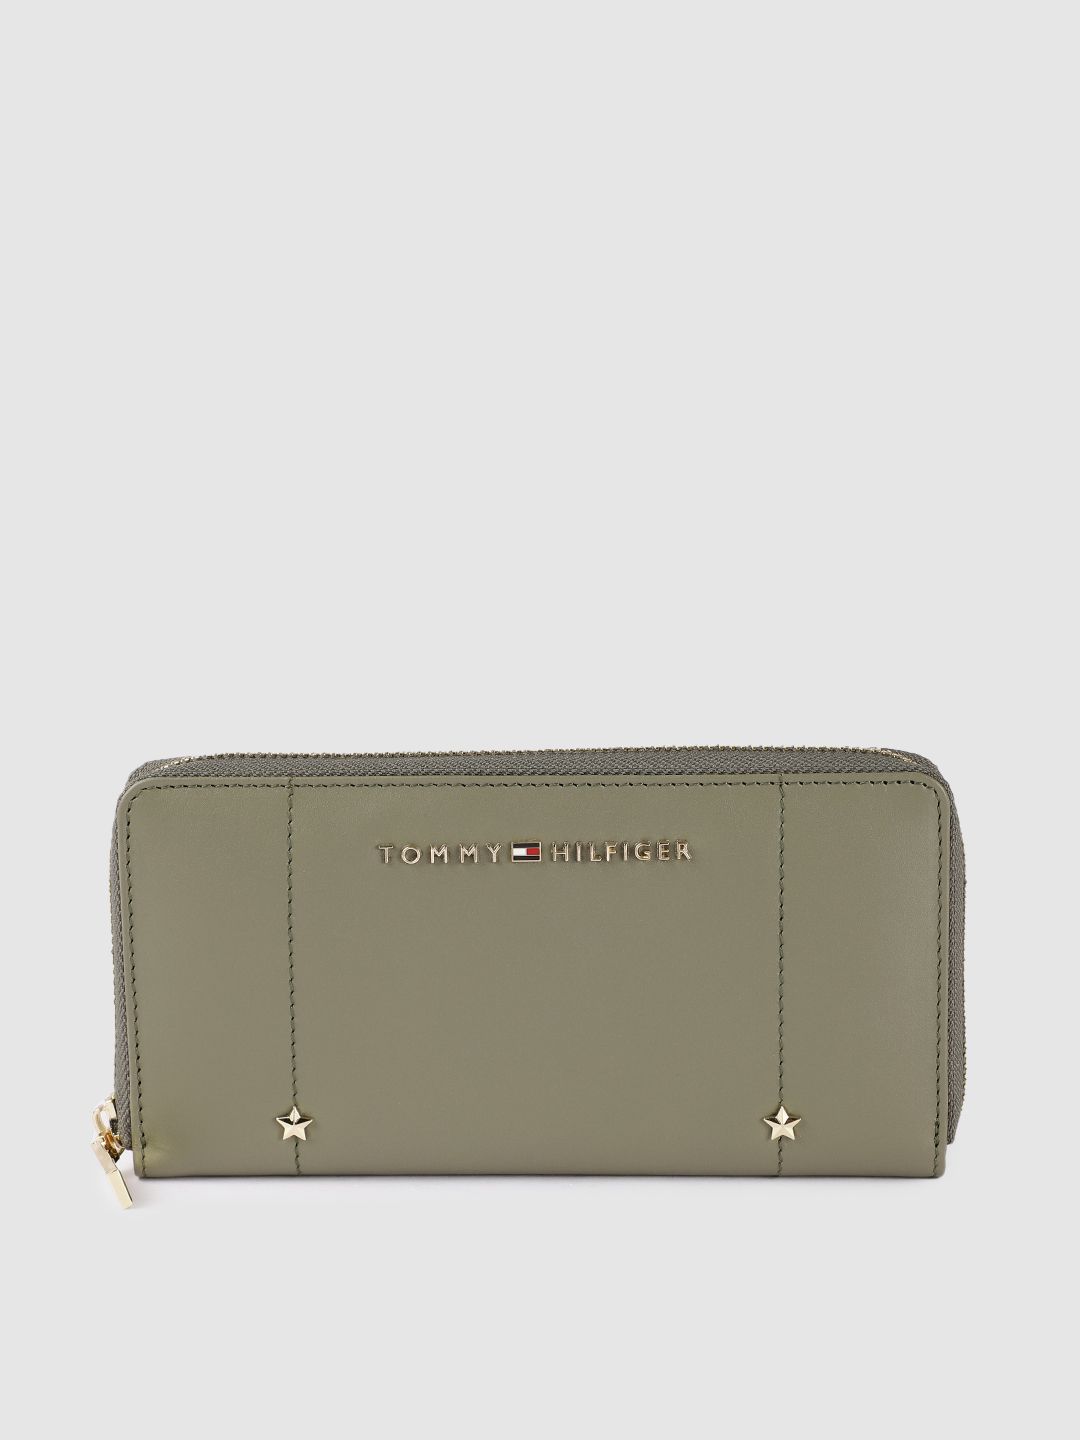 Tommy Hilfiger Women Olive Green Leather Zip Around Wallet Price in India